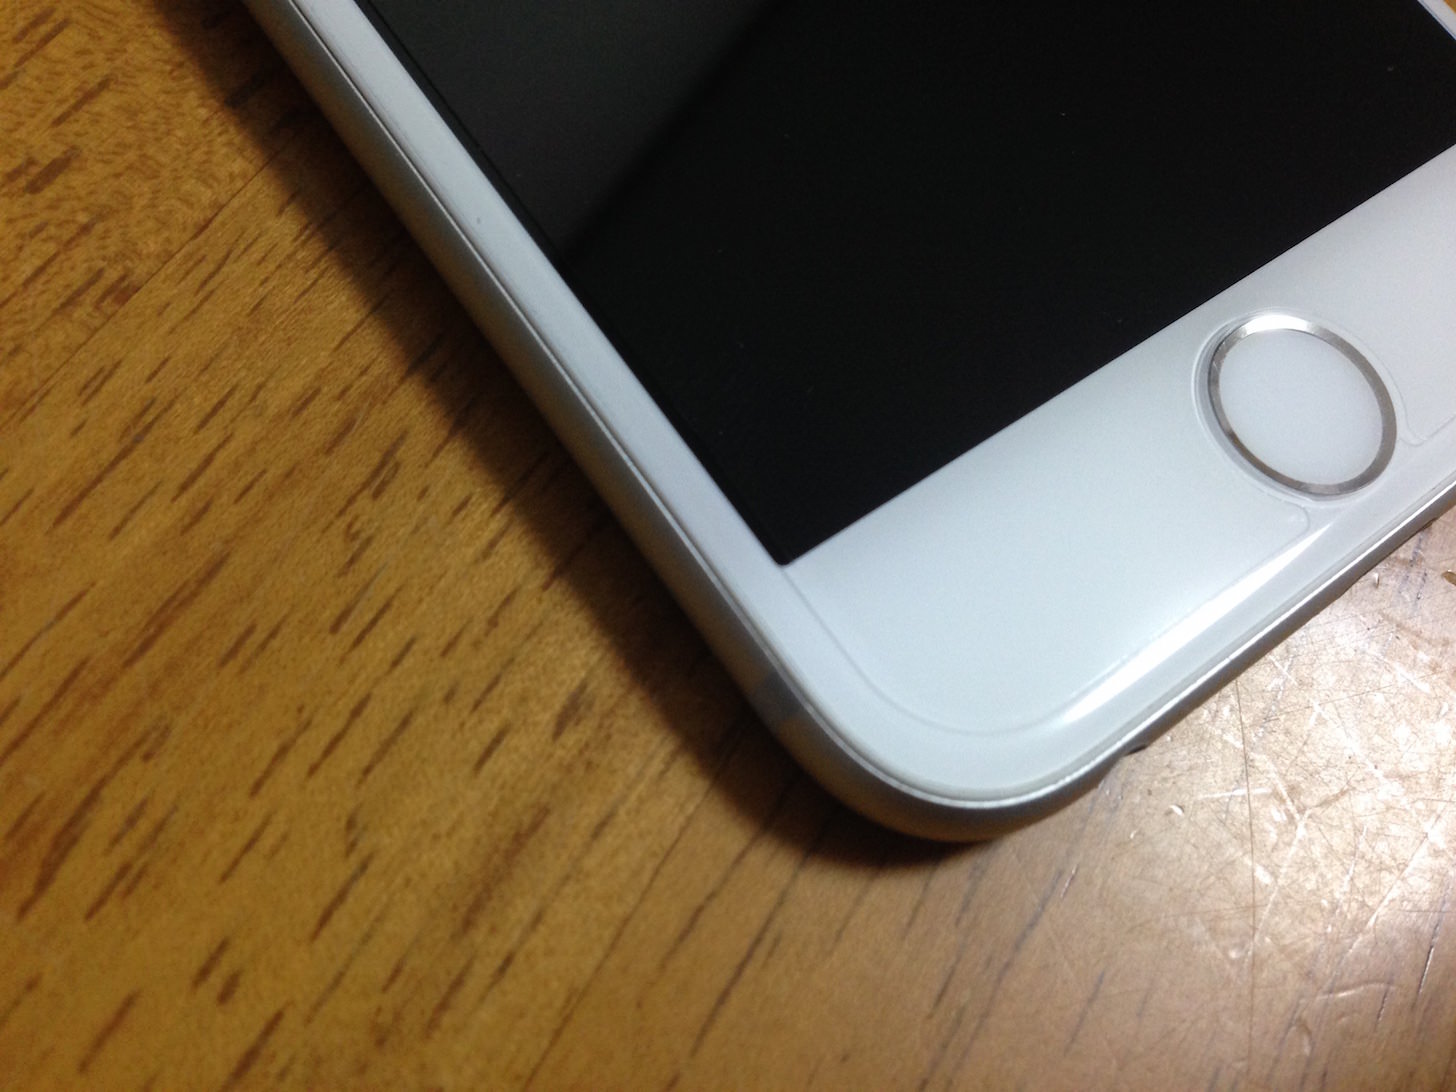 iPhone6 保護フィルム貼った